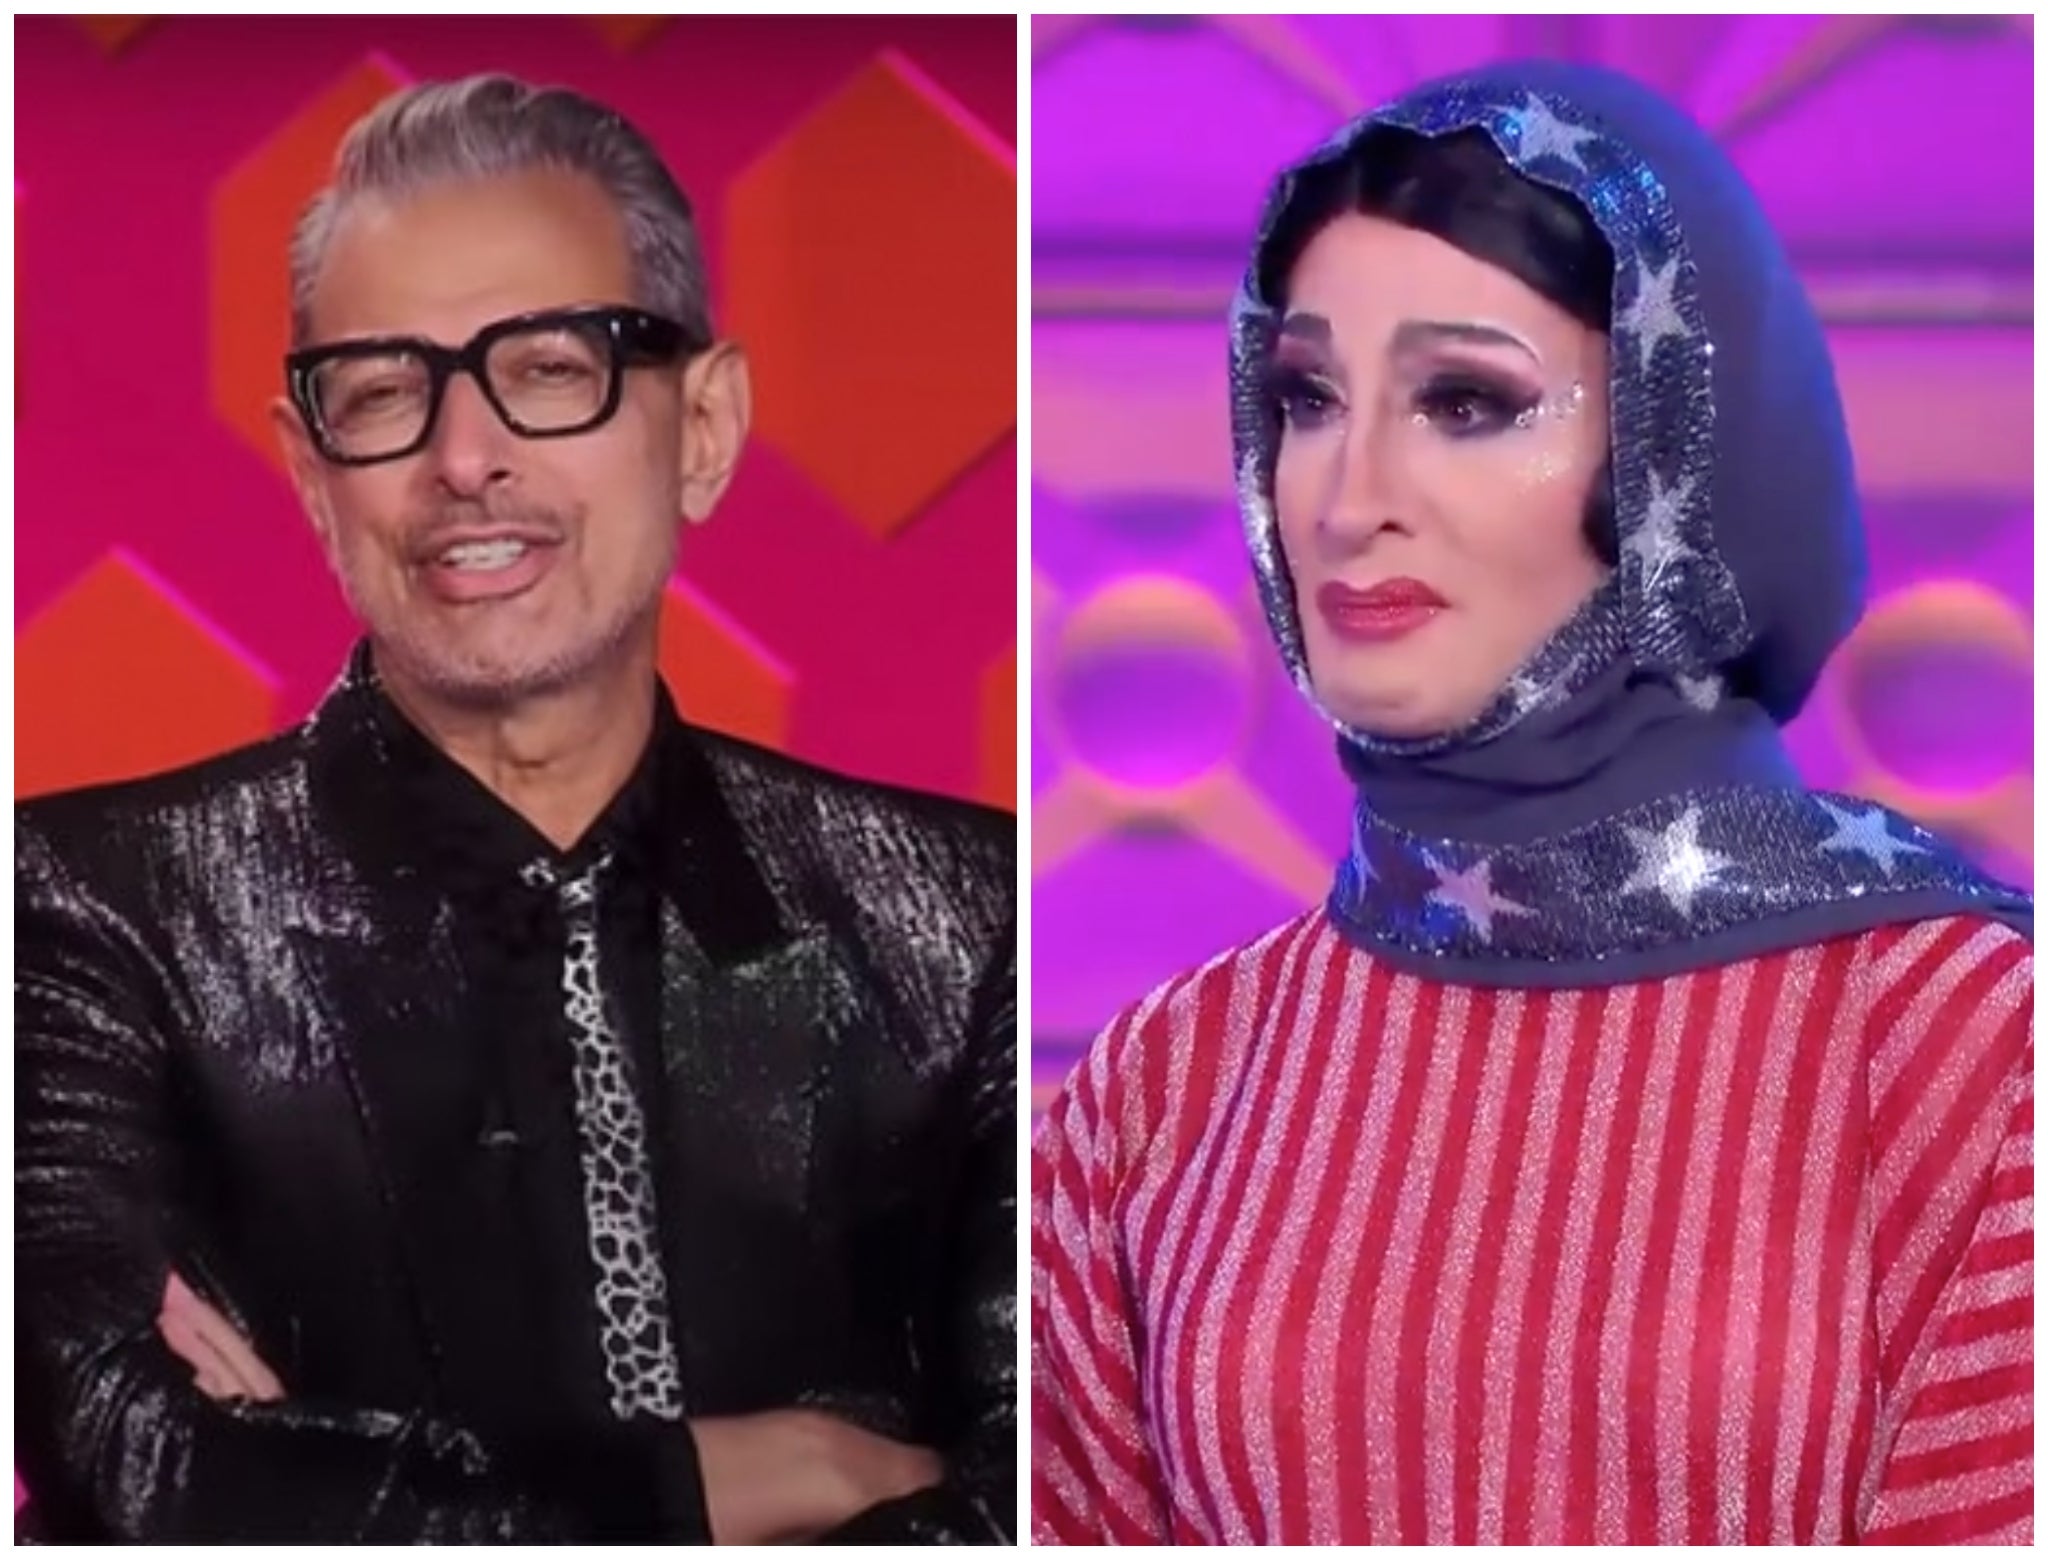 RuPauls Drag Race Jeff Goldblum receives backlash for Islam comments to Jackie Cox The Independent The Independent